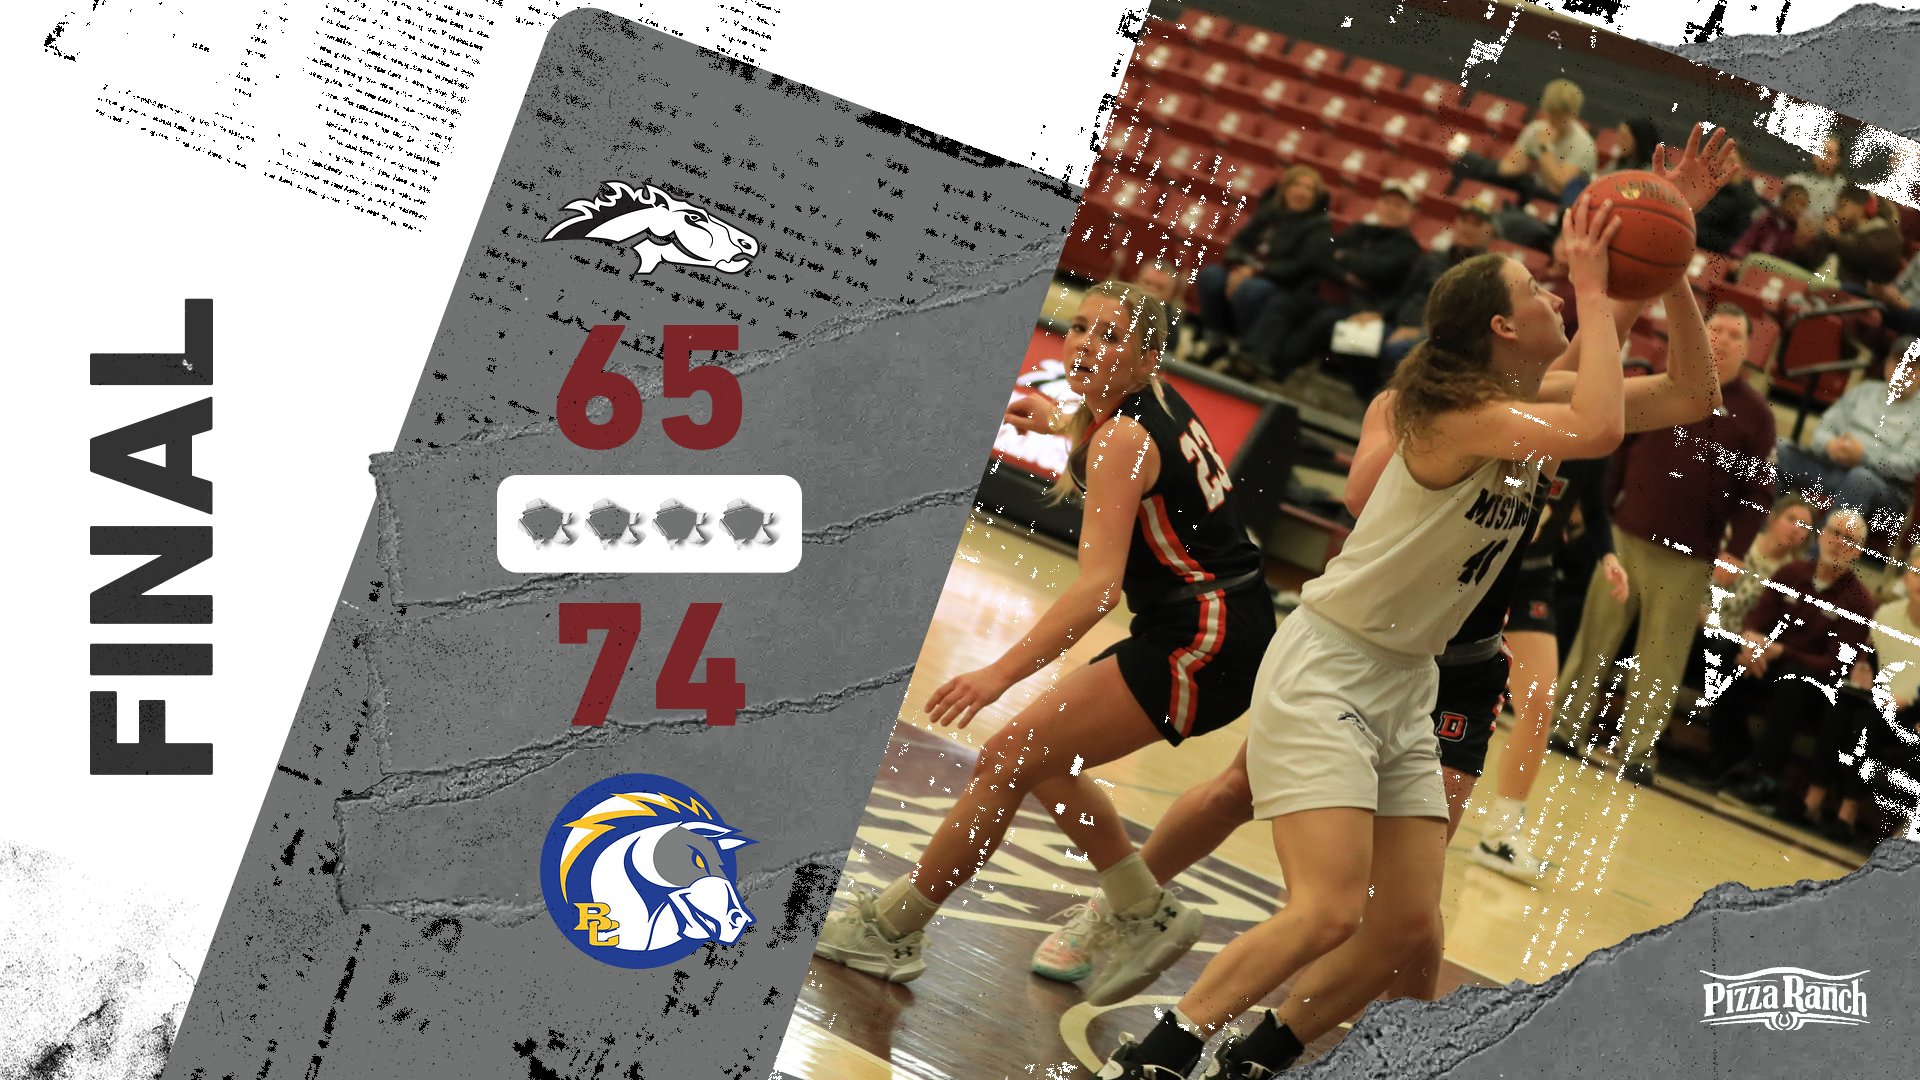 Late flurry from Chargers sinks Morningside, 74-65